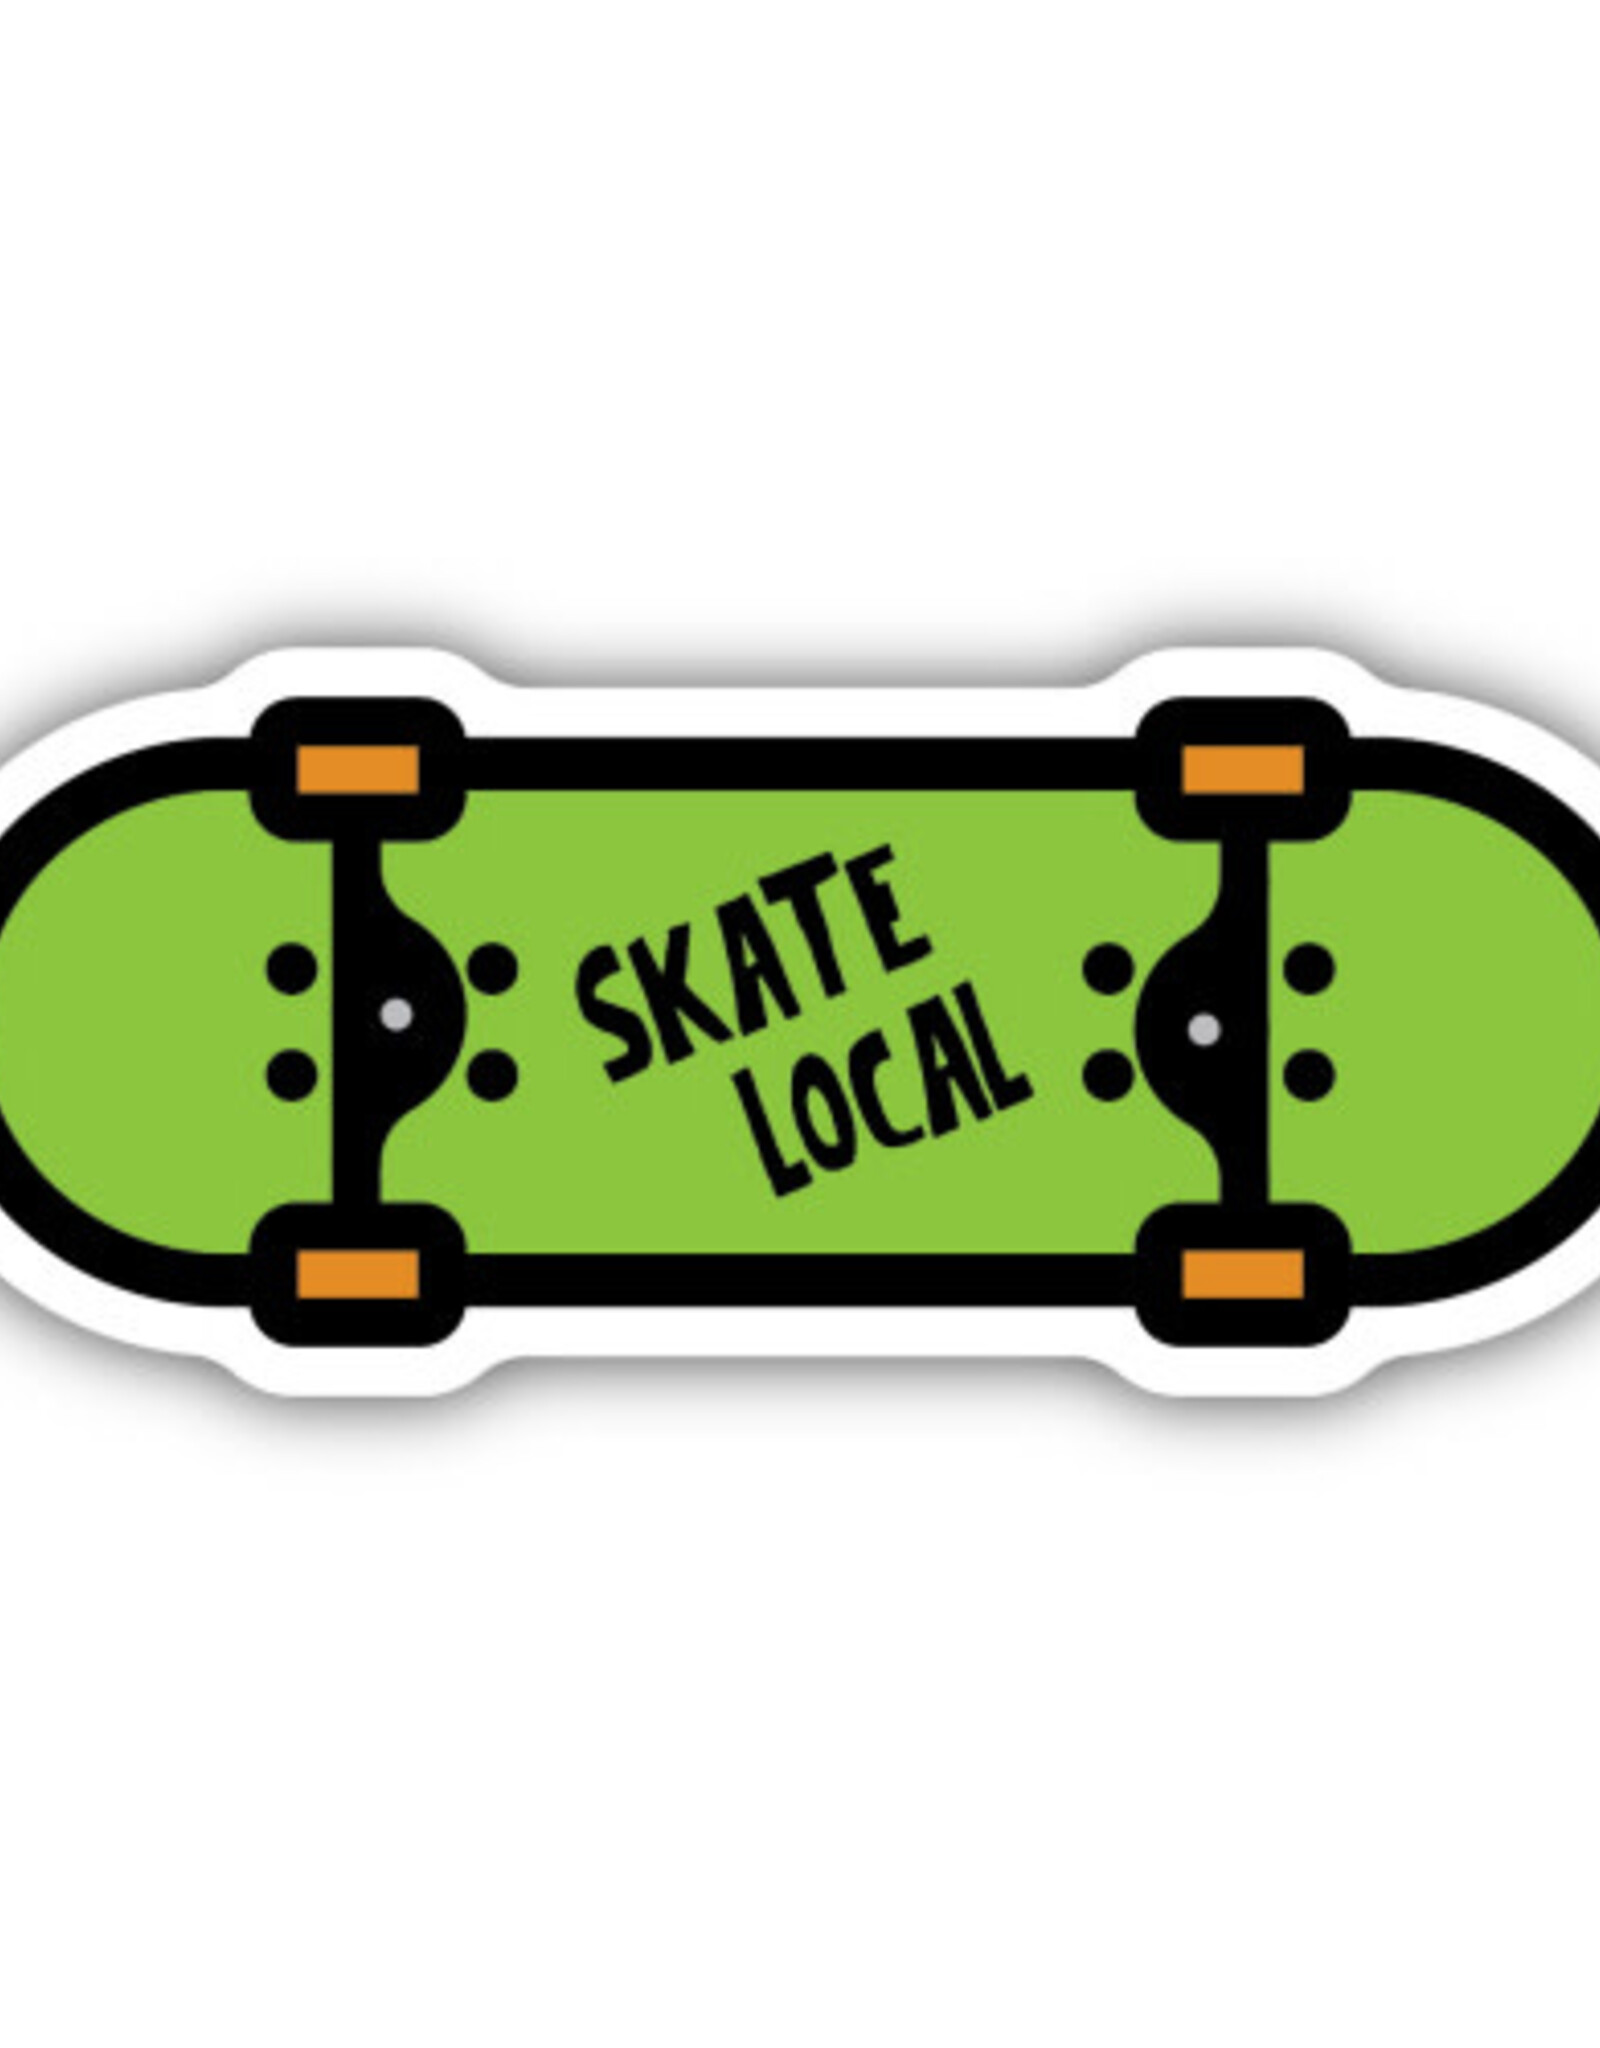 Northwest Stickers NW Stickers Skate Local